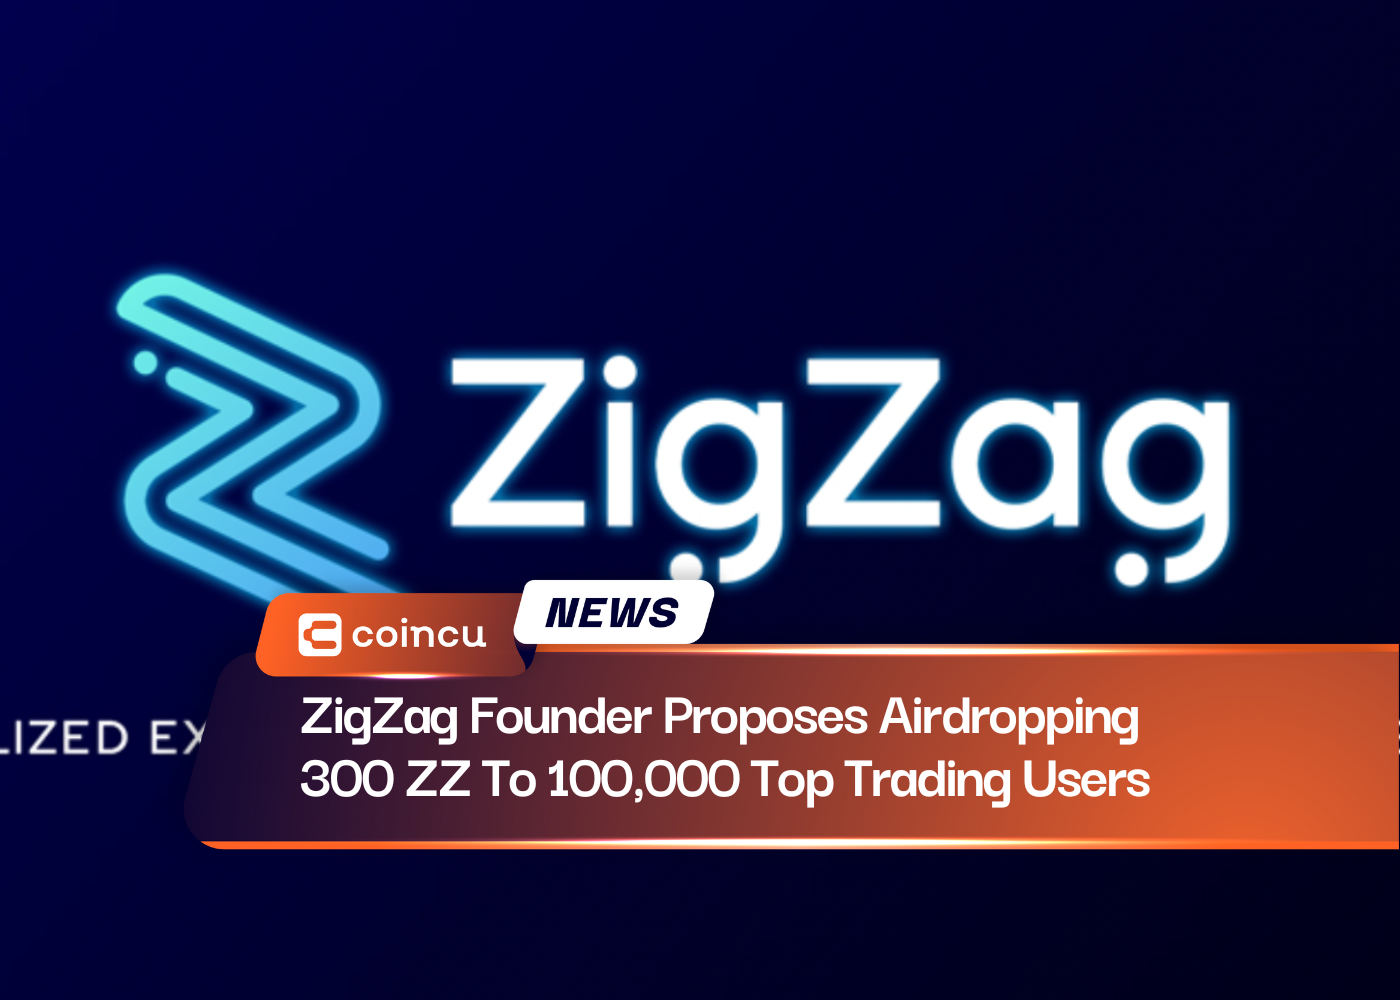 ZigZag Founder Proposes Airdropping 300 ZZ To 100,000 Top Trading Users